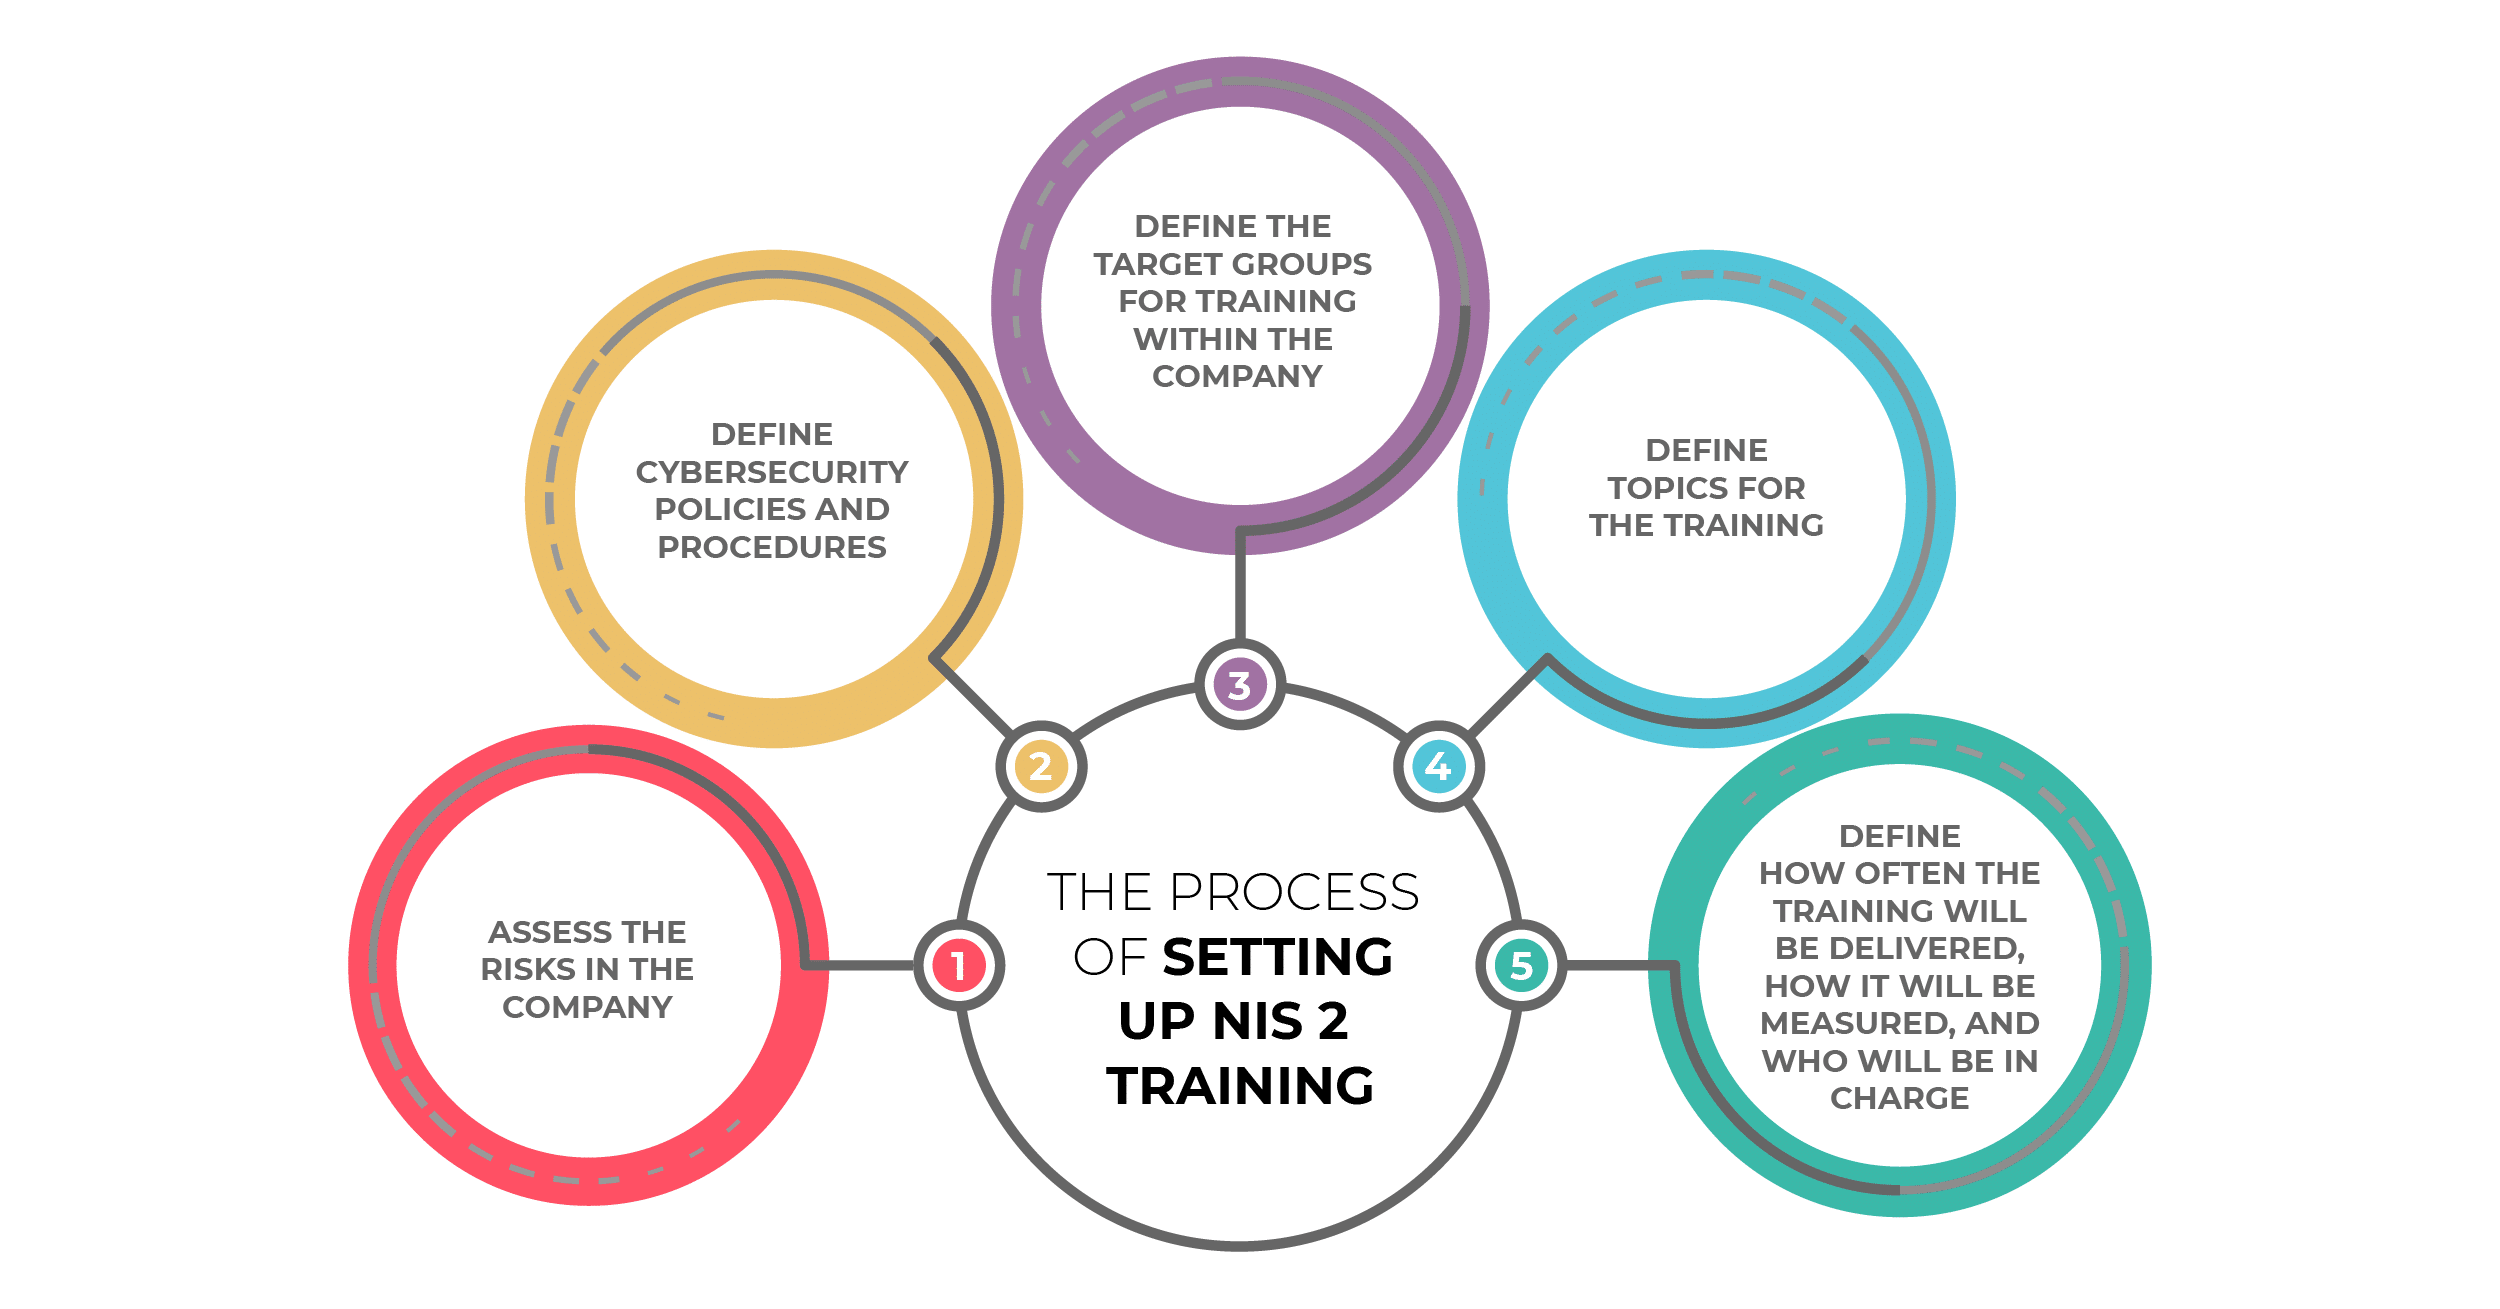 The process of setting up NIS 2 training